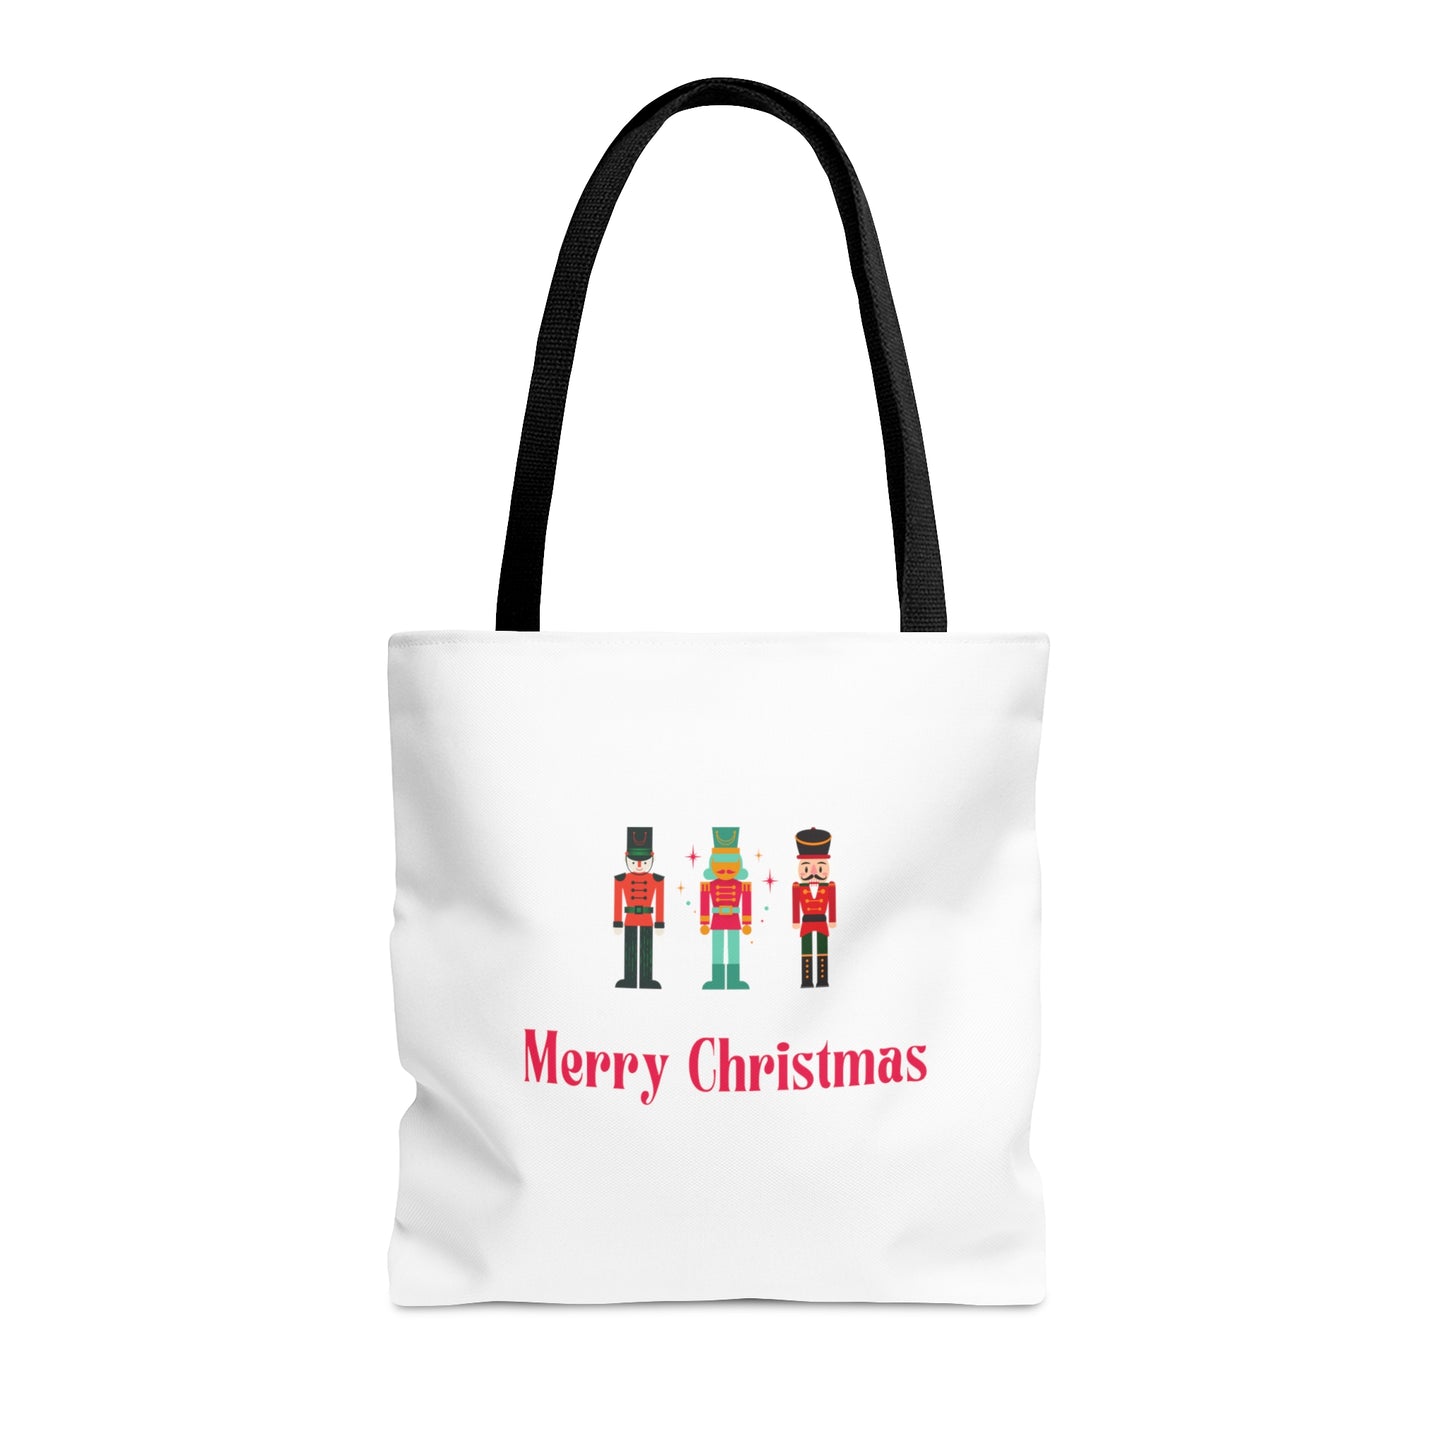 Beautiful Merry Christmas Printed Canvas Tote Bags